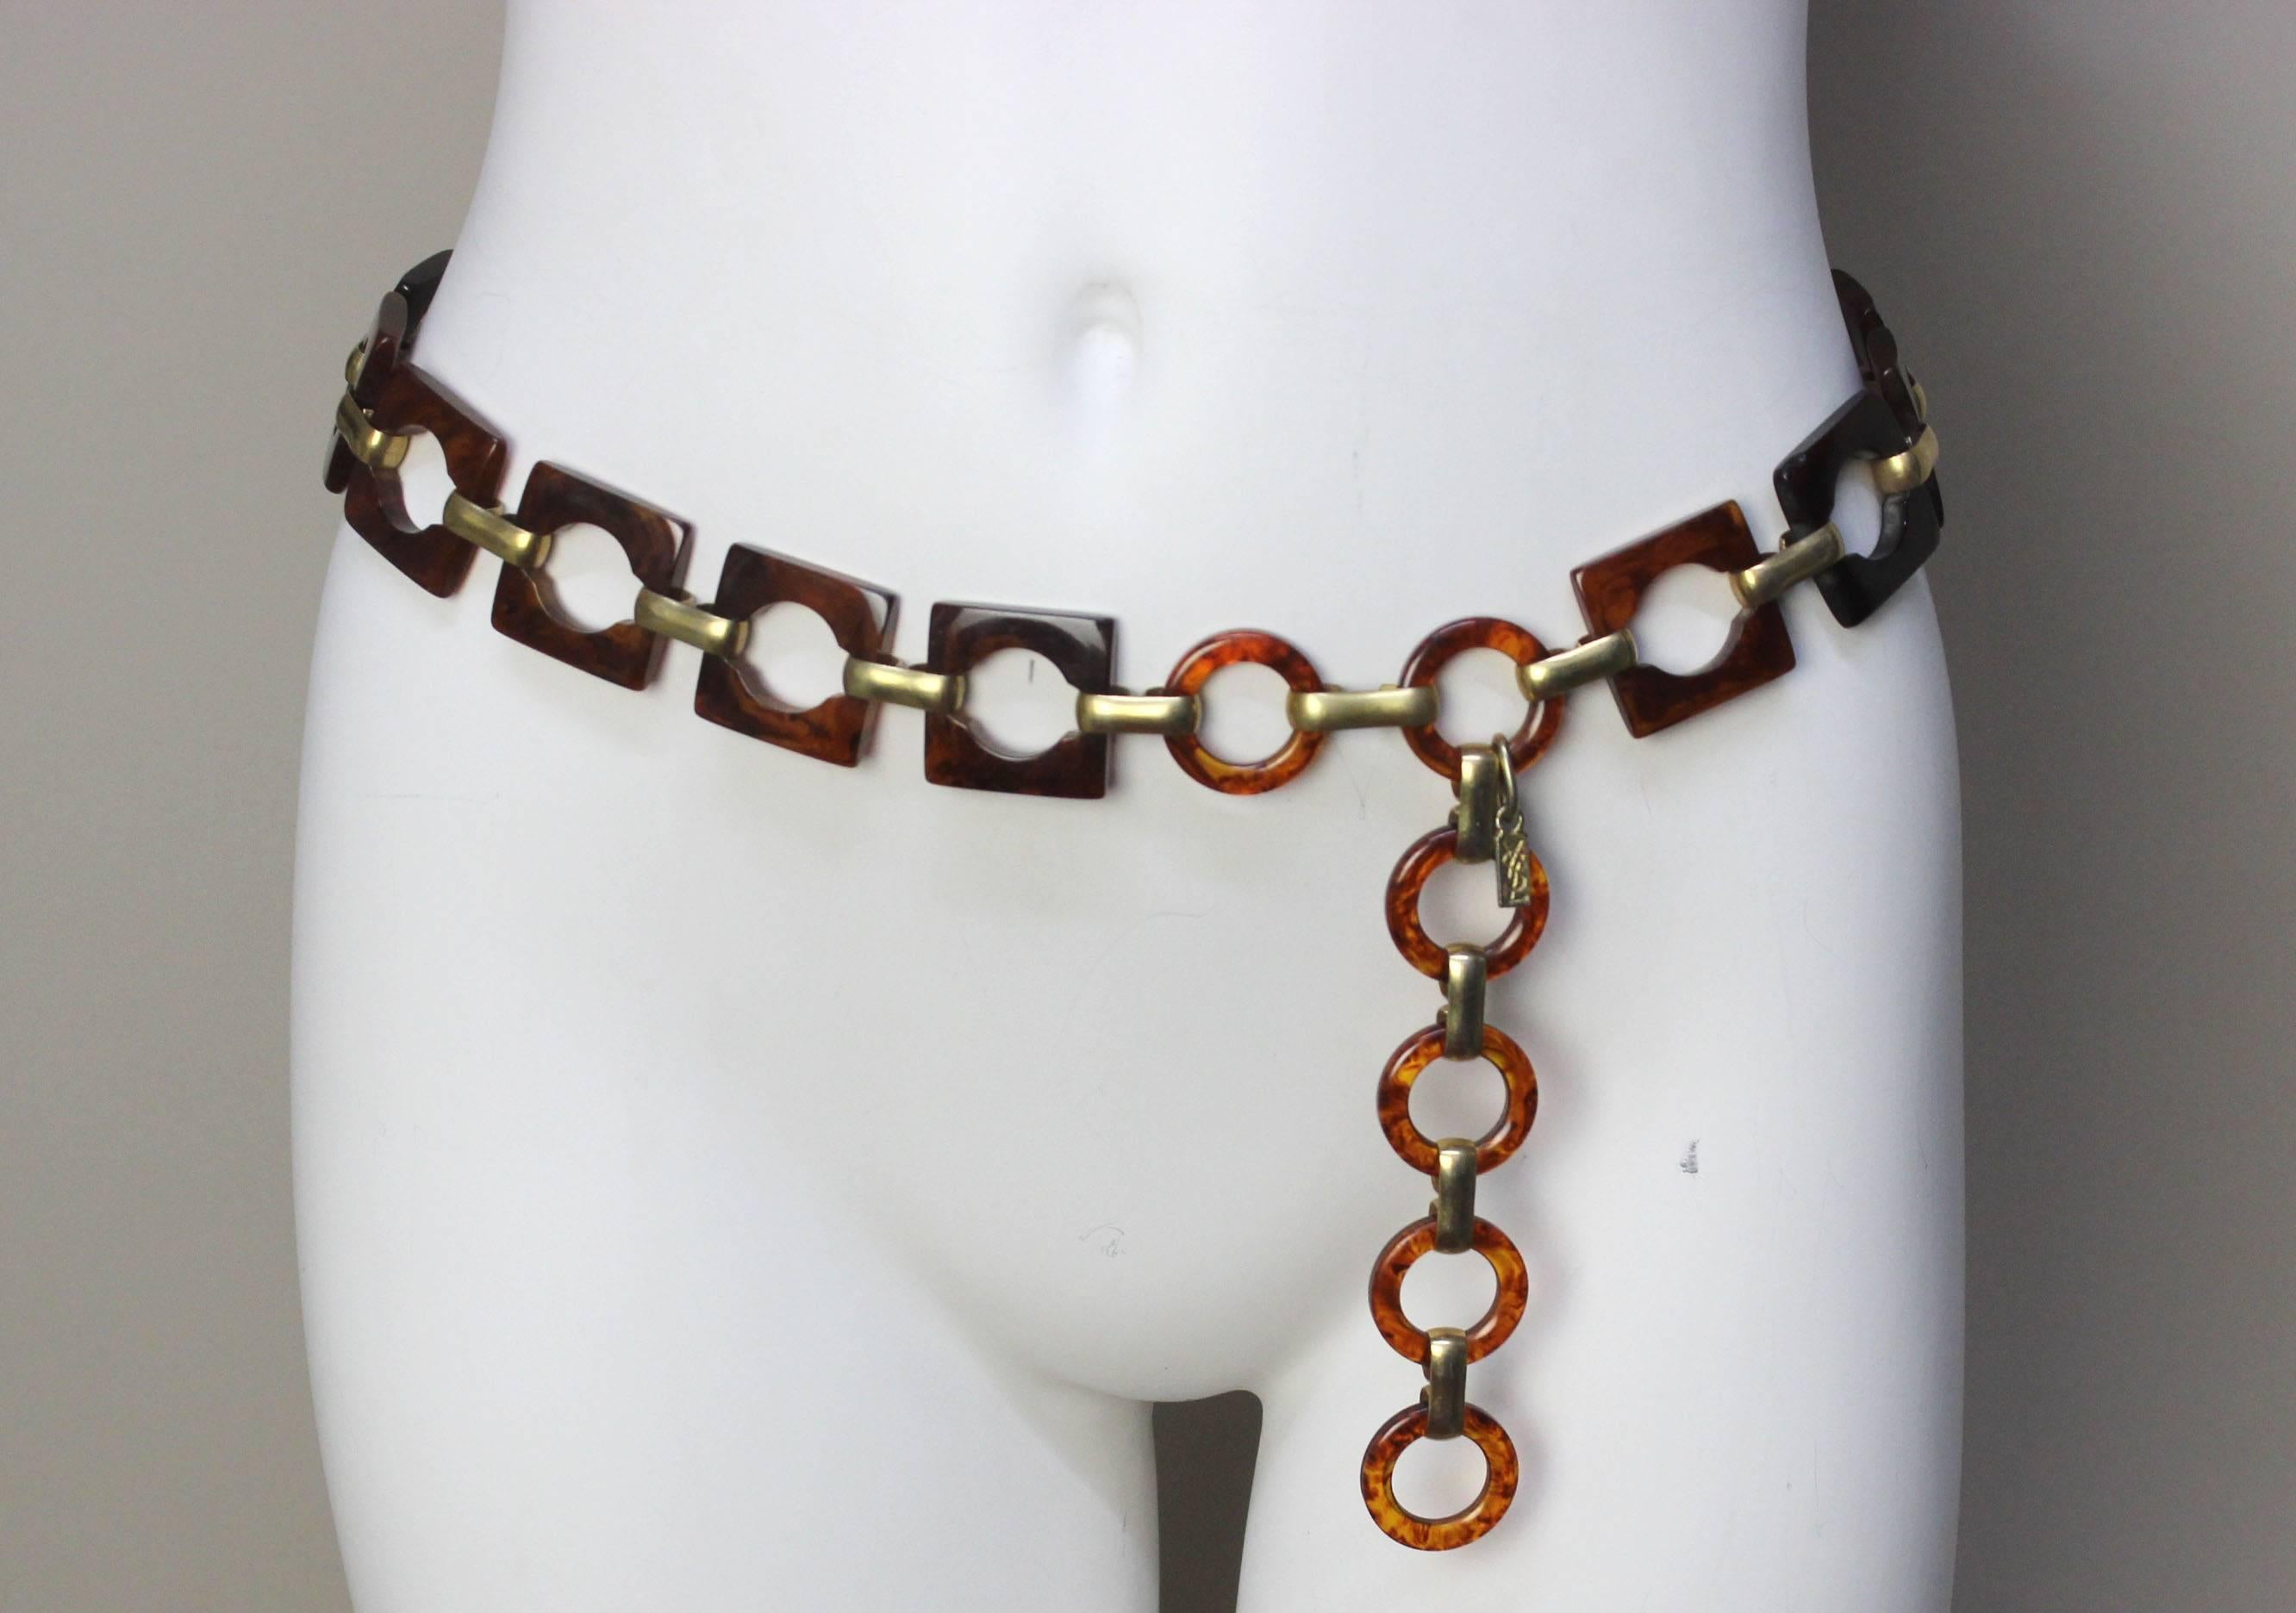 This piece can be worn either as a statement necklace or slung on the waist or hips as a belt. The square links have cut out circles connected by brass links. At either end are round links, adding to the geometric design. The links have a